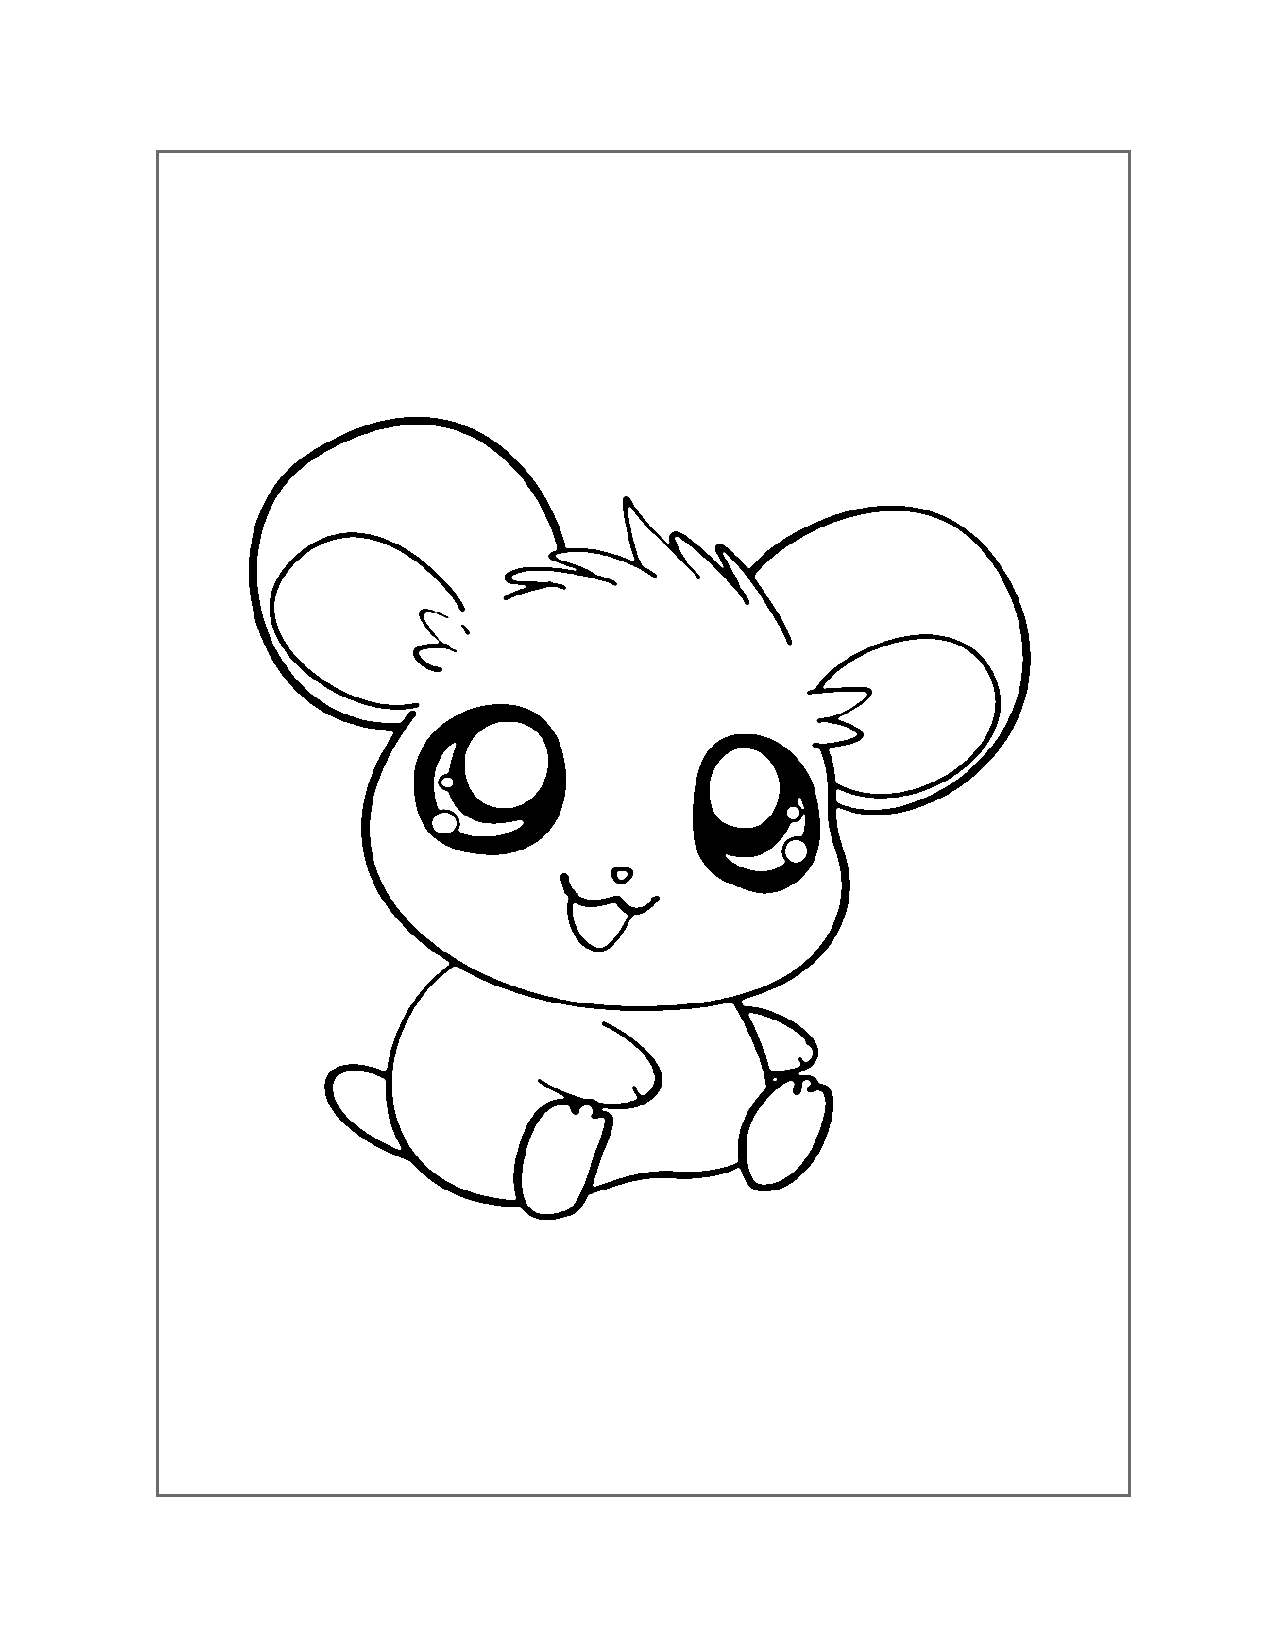 Cute Hamster Coloring Page